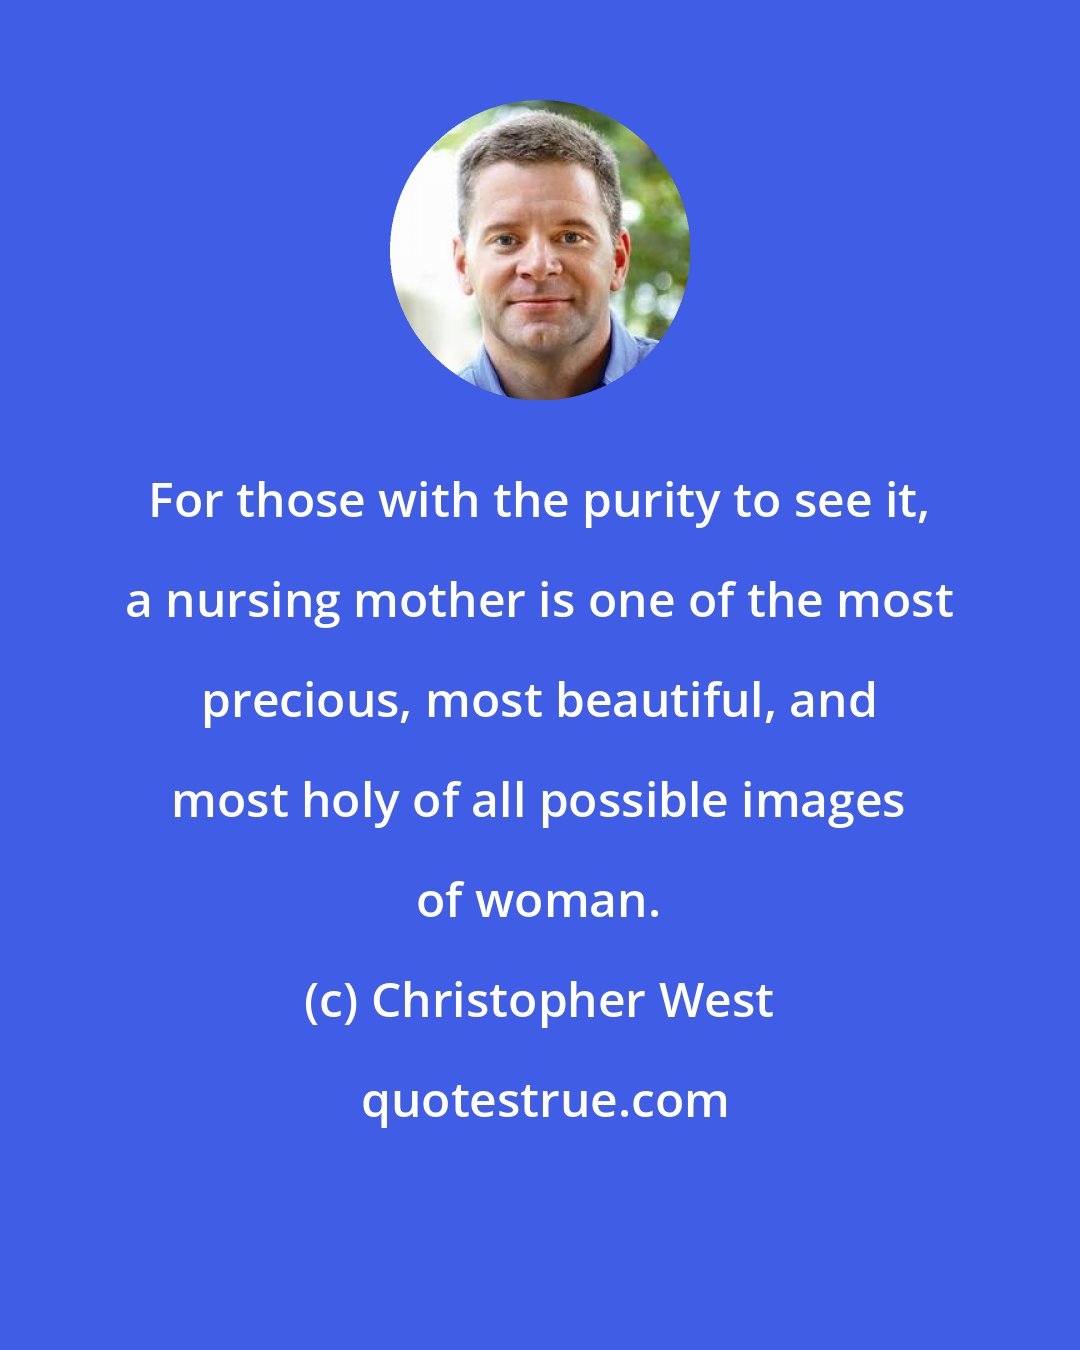 Christopher West: For those with the purity to see it, a nursing mother is one of the most precious, most beautiful, and most holy of all possible images of woman.